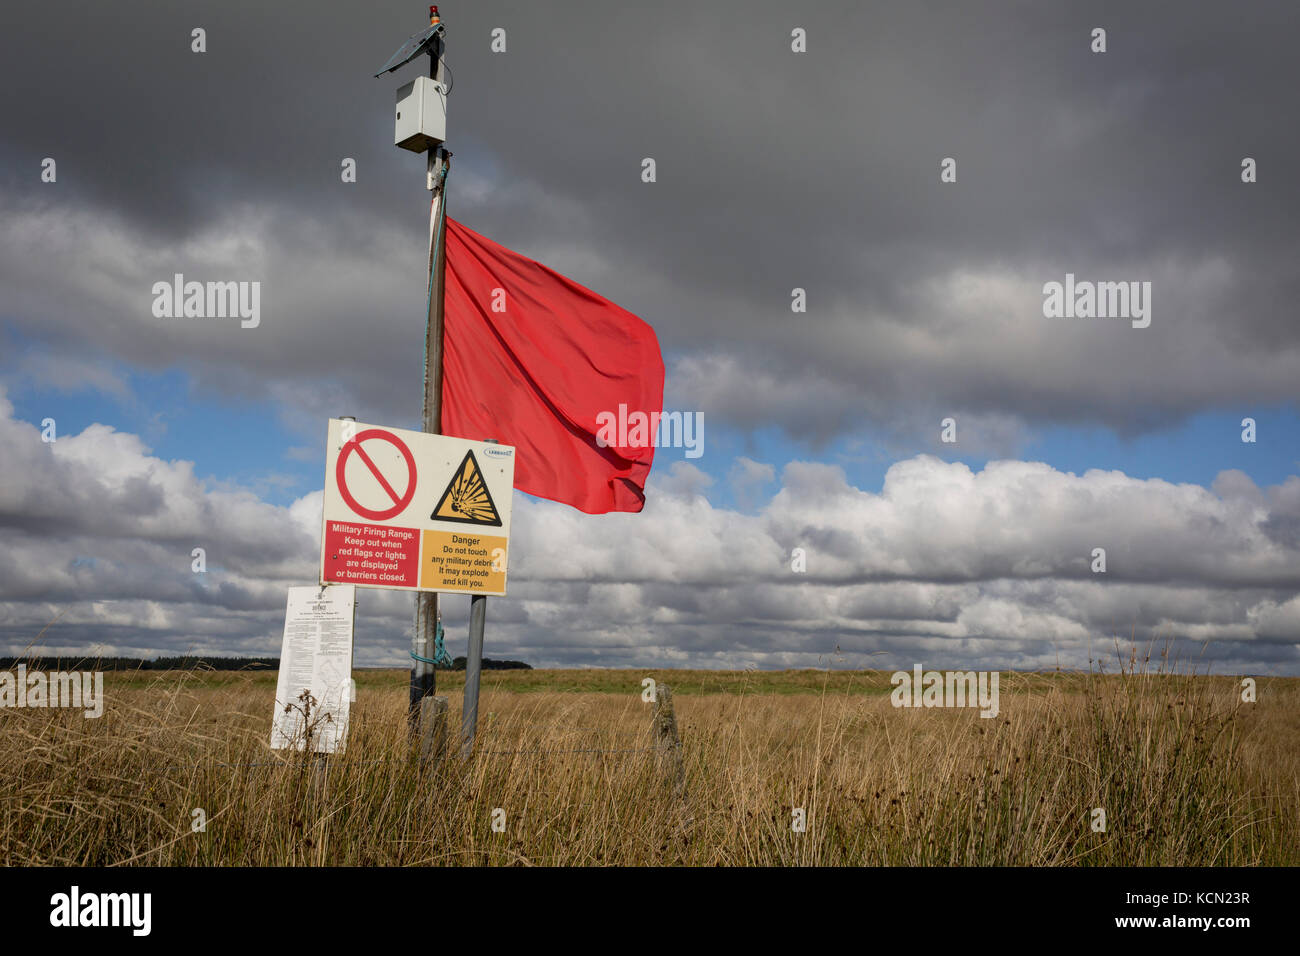 A red warning flag flies on the perimeter during military live firing at Otterburn Ranges, on 28th September 2017, in Otterburn, Northumberland, England. Twenty-three per cent of Northumberland National Park is owned by the Ministry of Defence and used as a military training area though they encourage as much access to the area as possible. Sometimes areas are cordoned off from the public for military exercises. Visitors are welcome outside of live firing times if no red flags are displayed. When military exercises are happening, red flags around the boundaries indicate restricted access. Visi Stock Photo